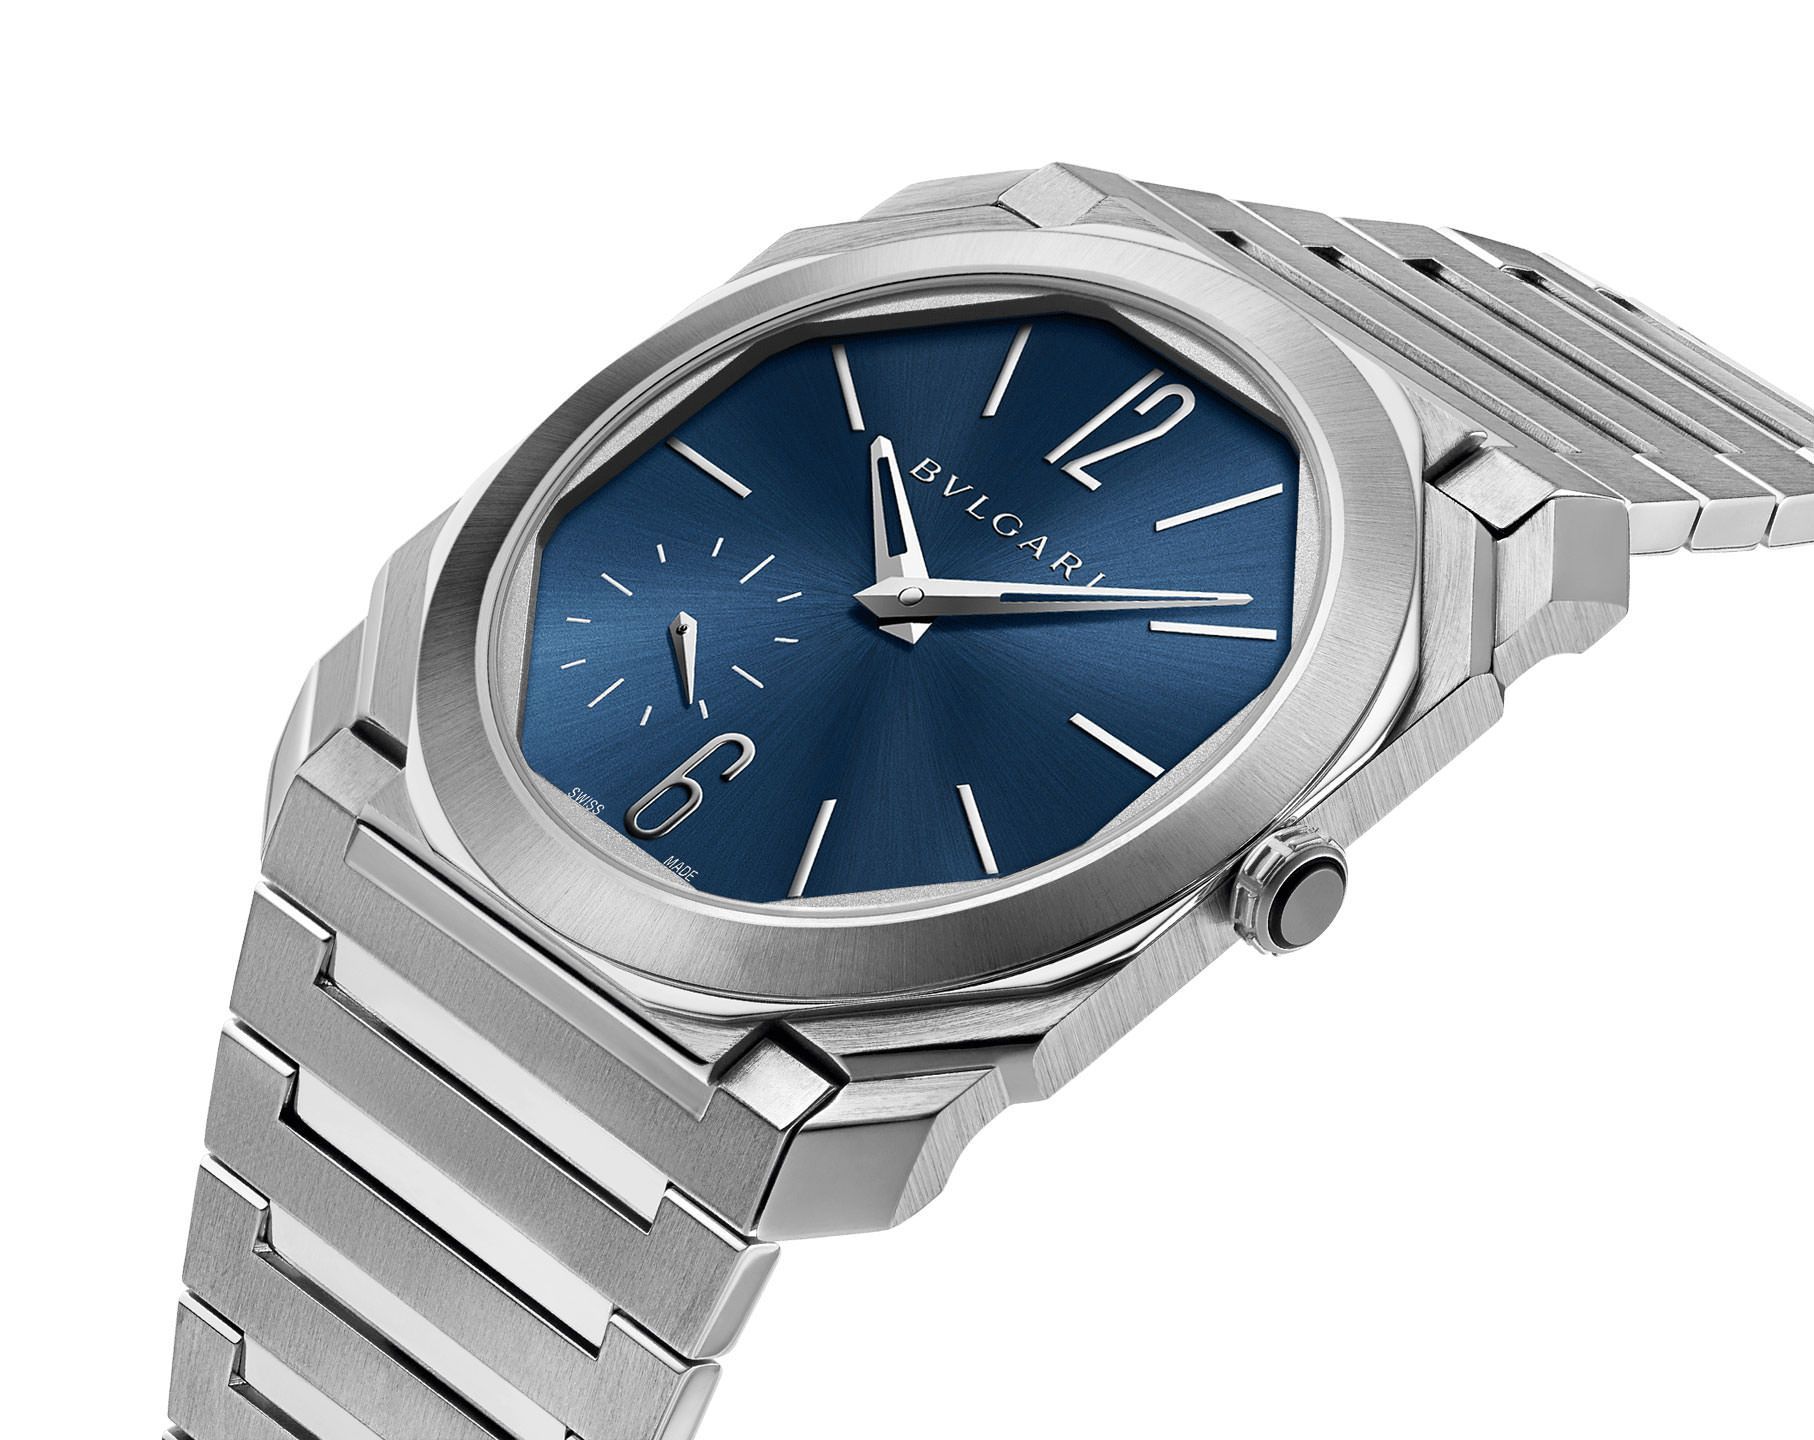 BVLGARI Finissimo 40 mm Watch in Blue Dial For Men - 3